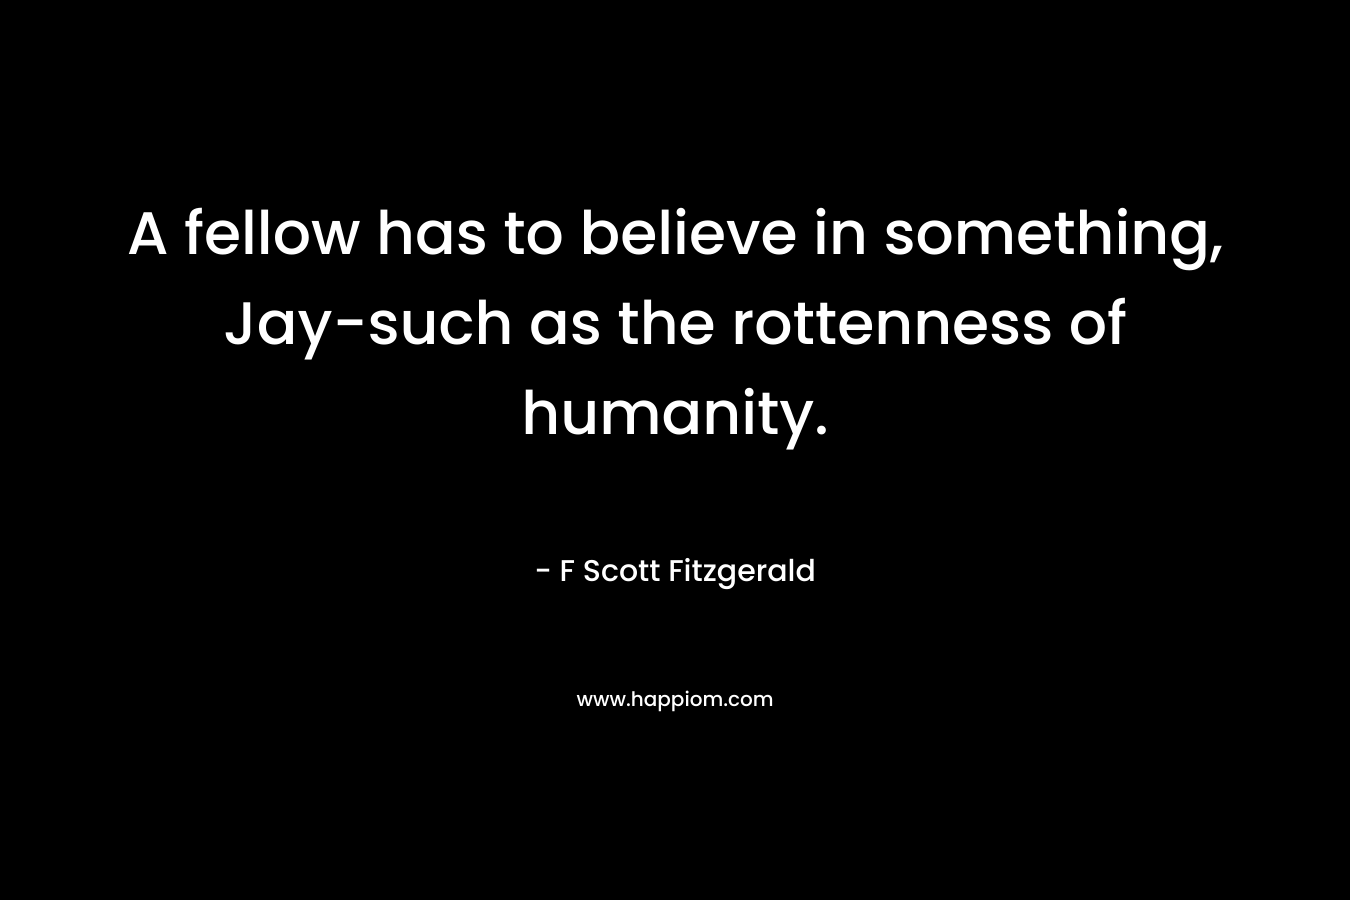 A fellow has to believe in something, Jay-such as the rottenness of humanity. – F Scott Fitzgerald